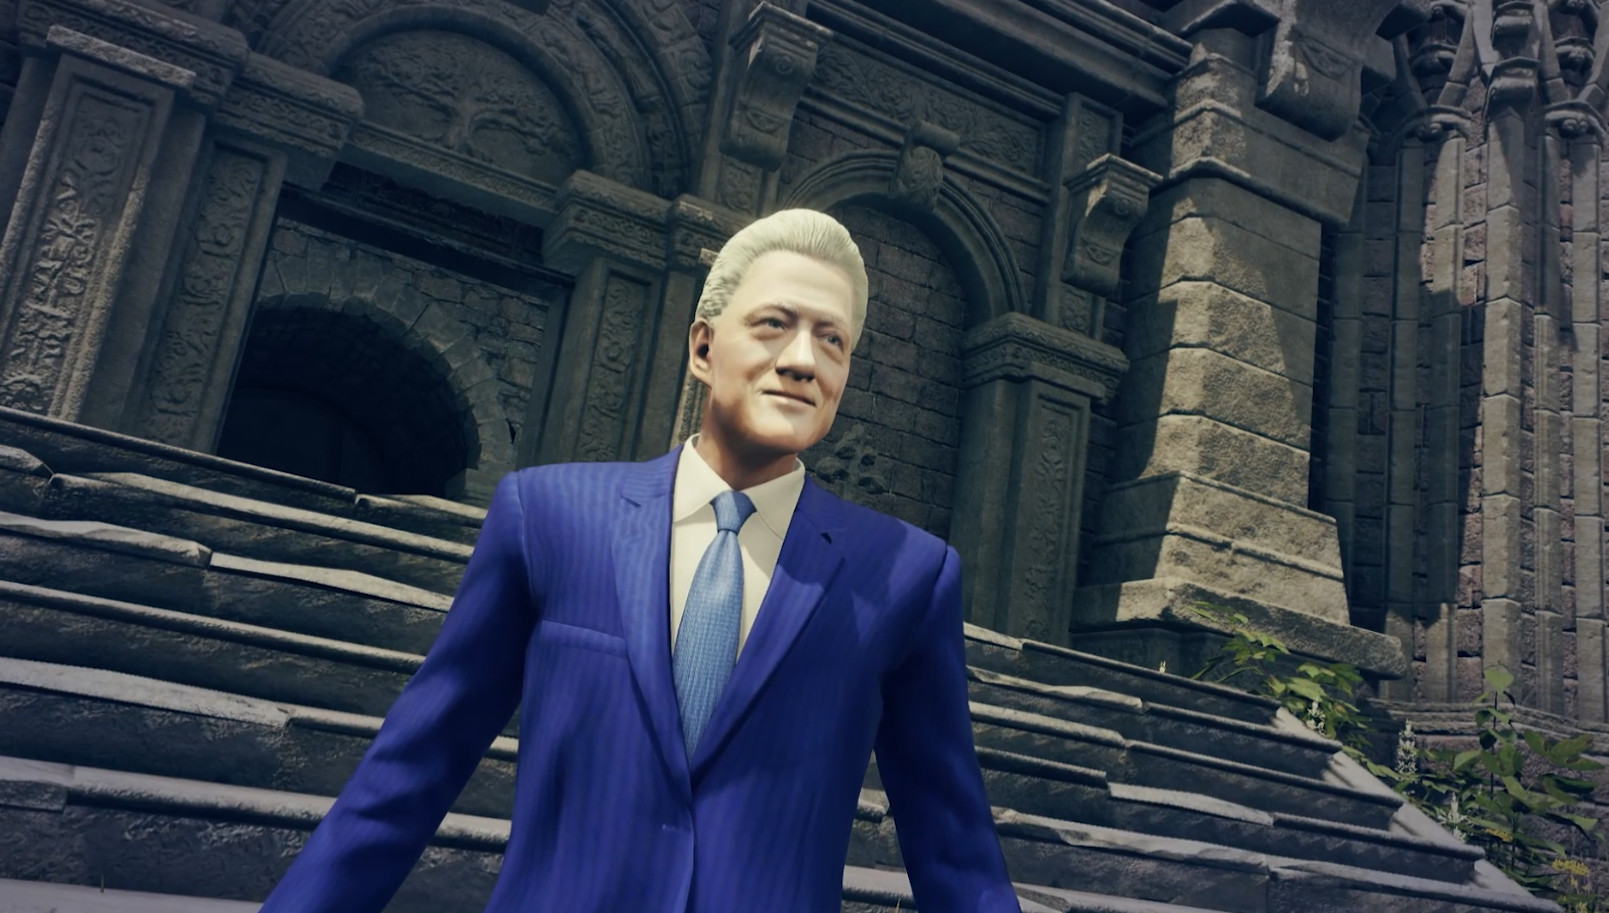 Bill Clinton wins Game of the Year